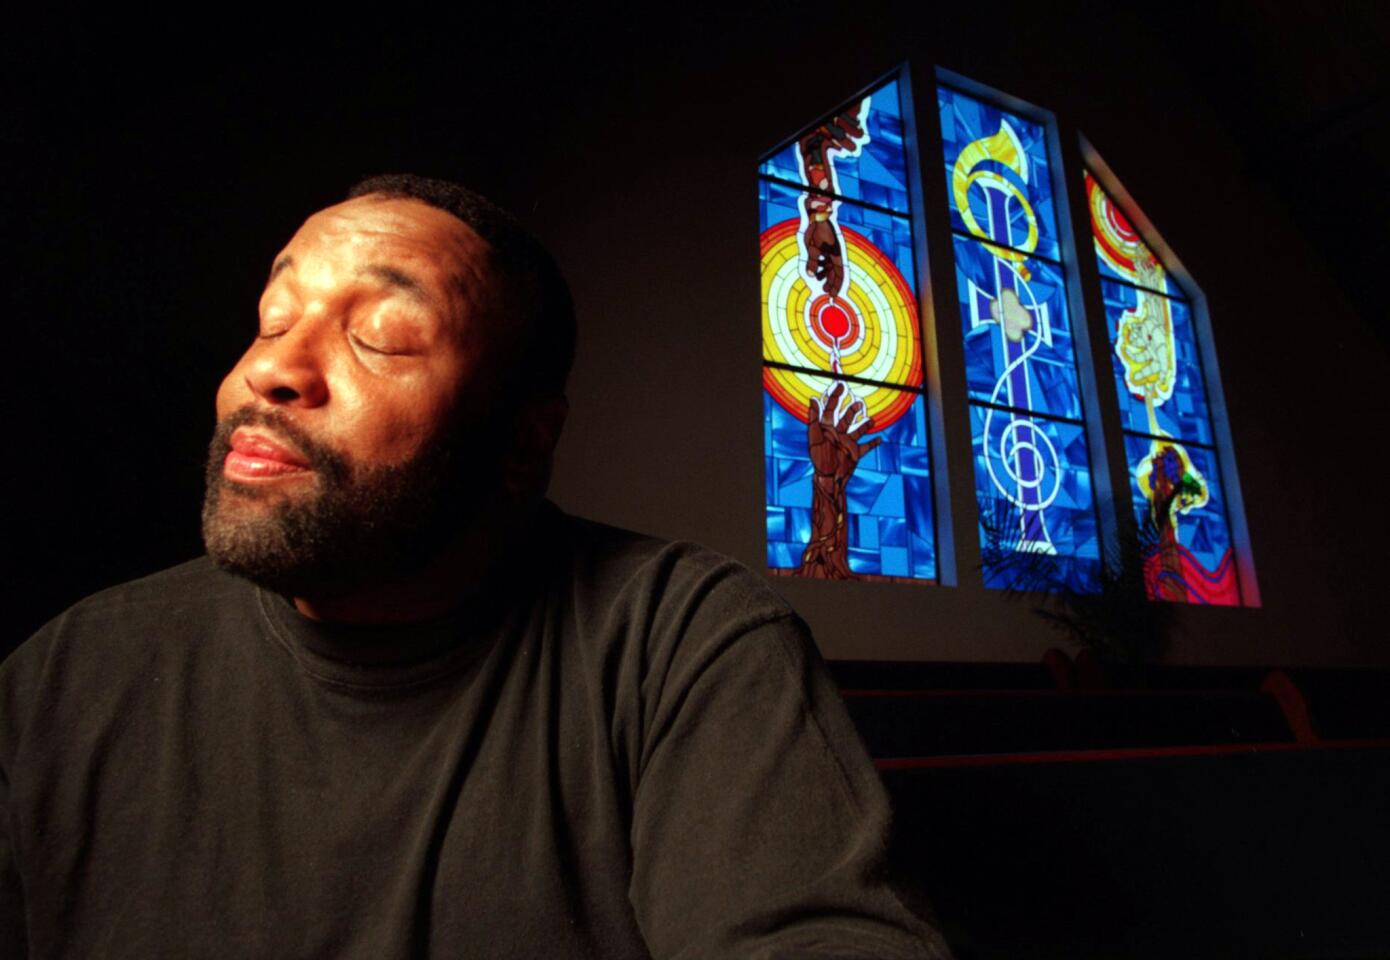 Grammy-winning gospel artist and pastor Andrae Crouch has died. He was 72.